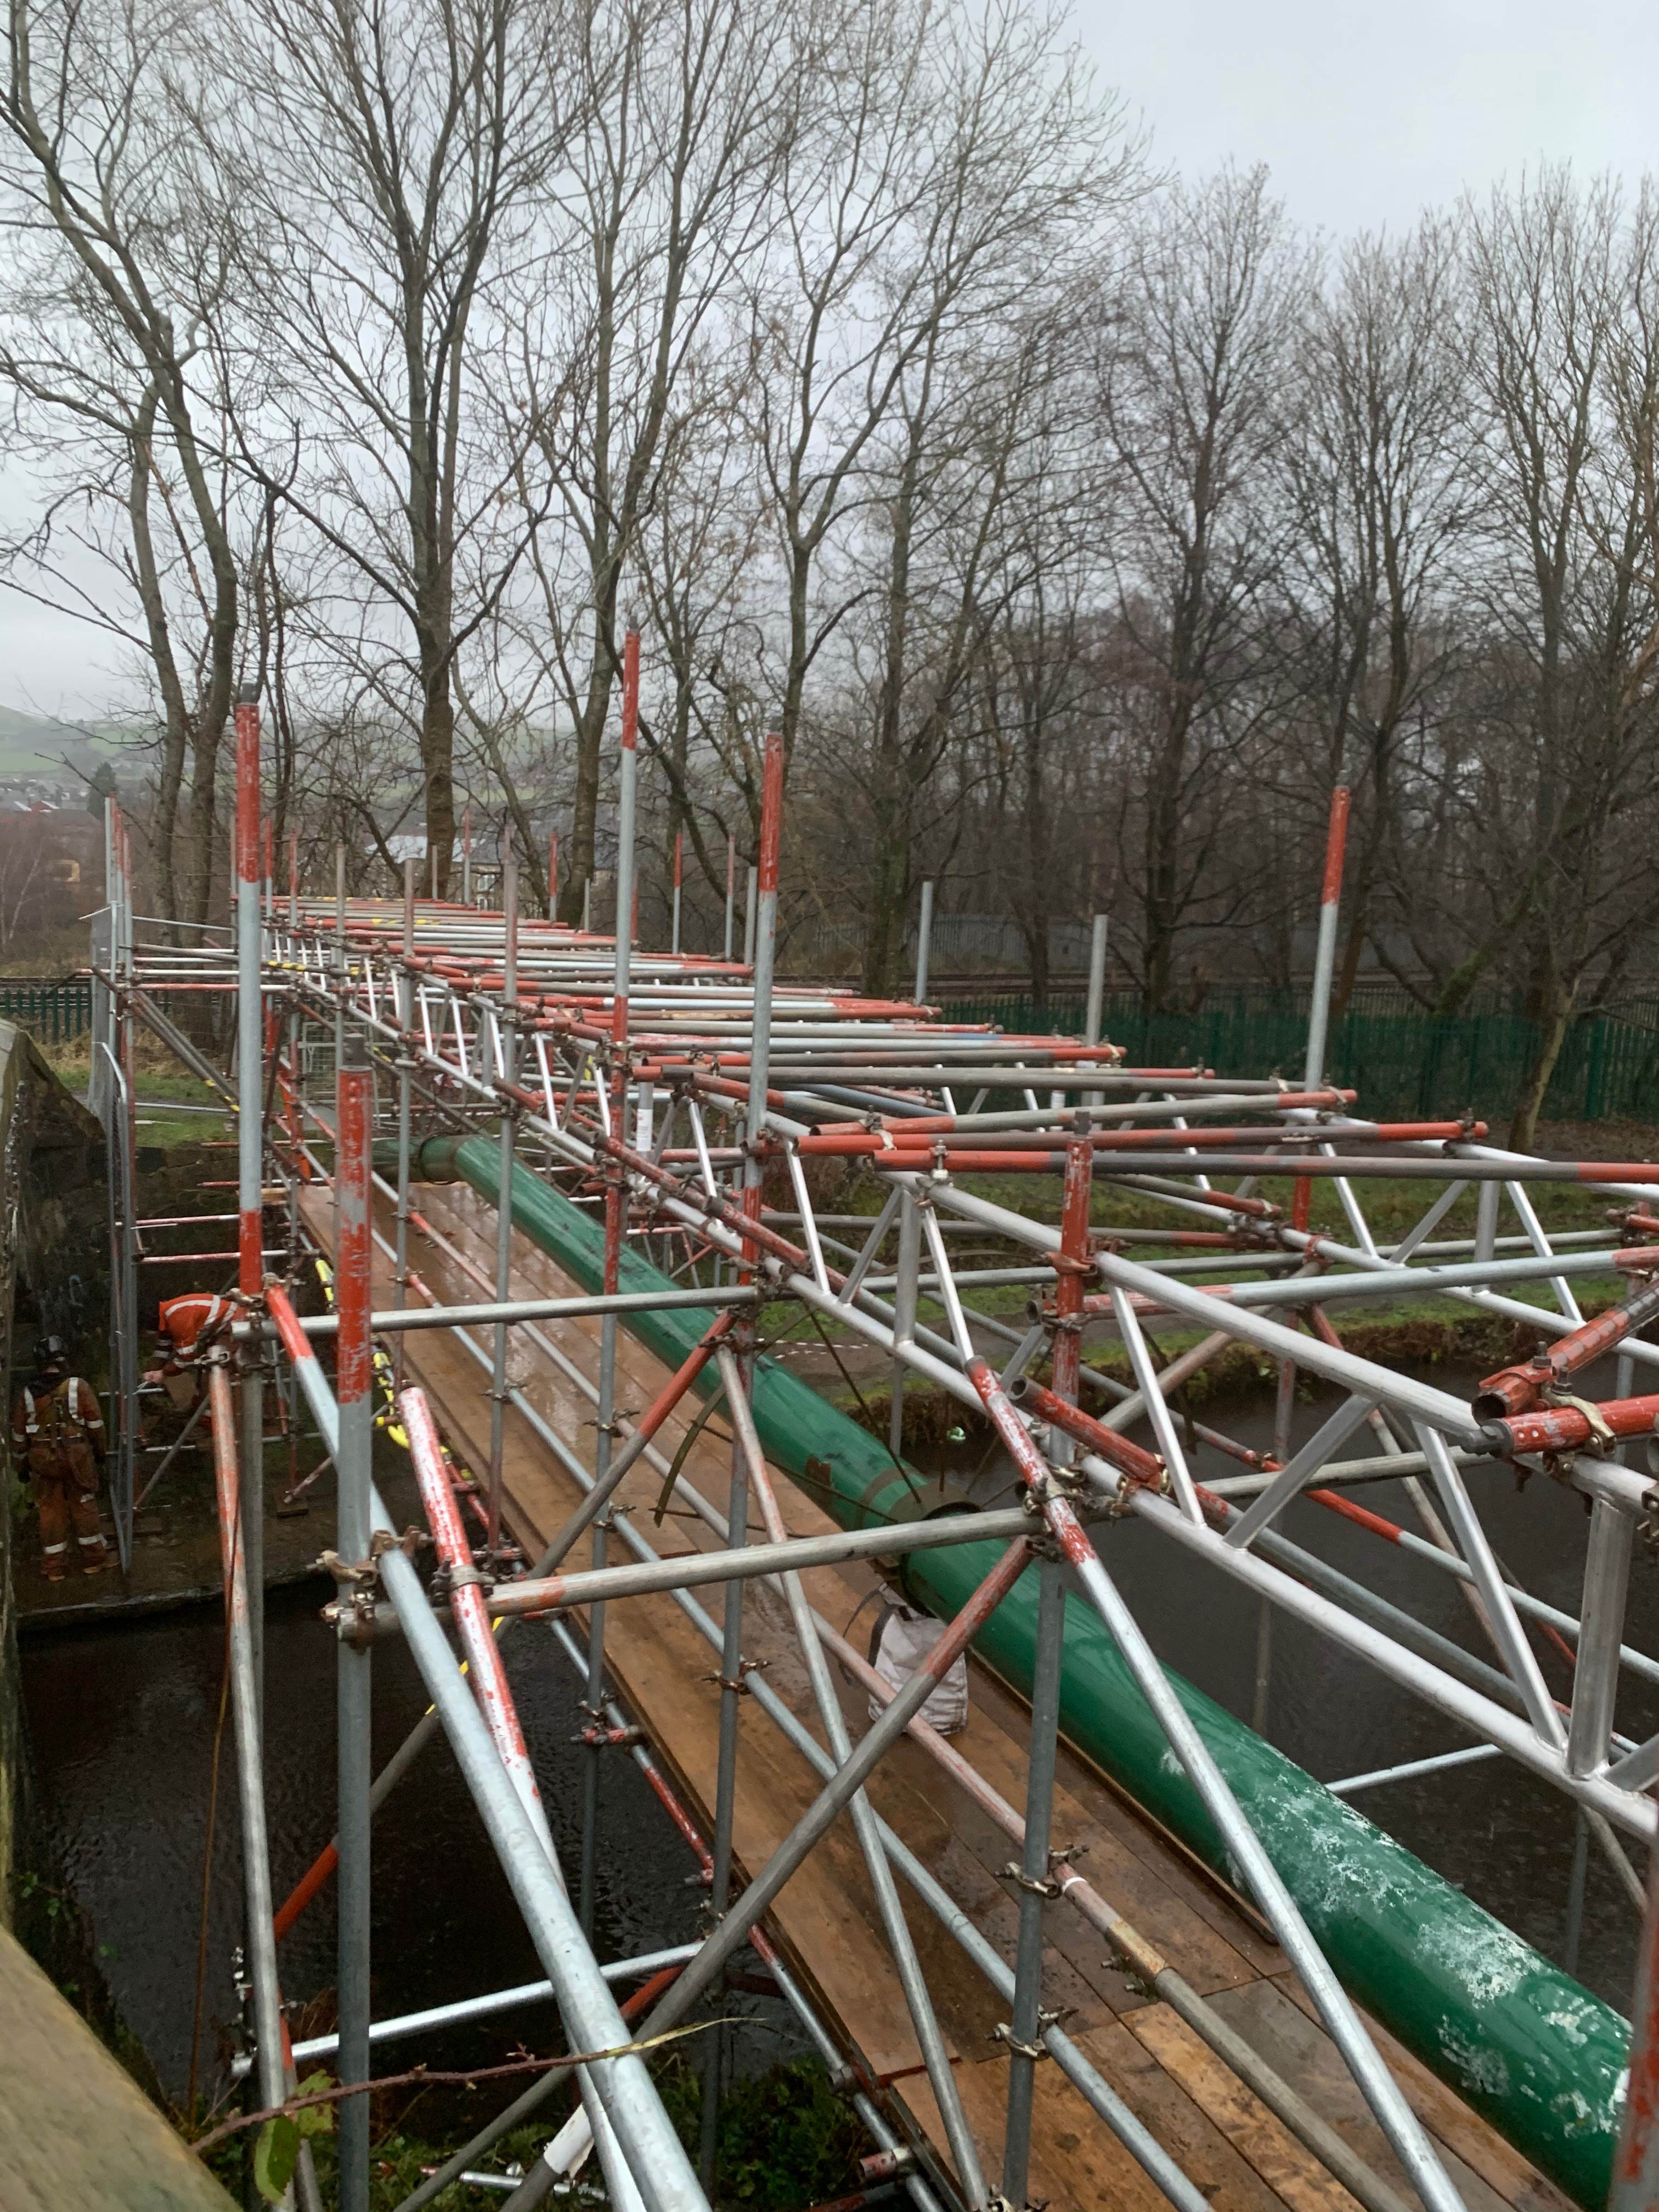 Tamworth Scaffolding: Pipework project - Utilities Pipework project
